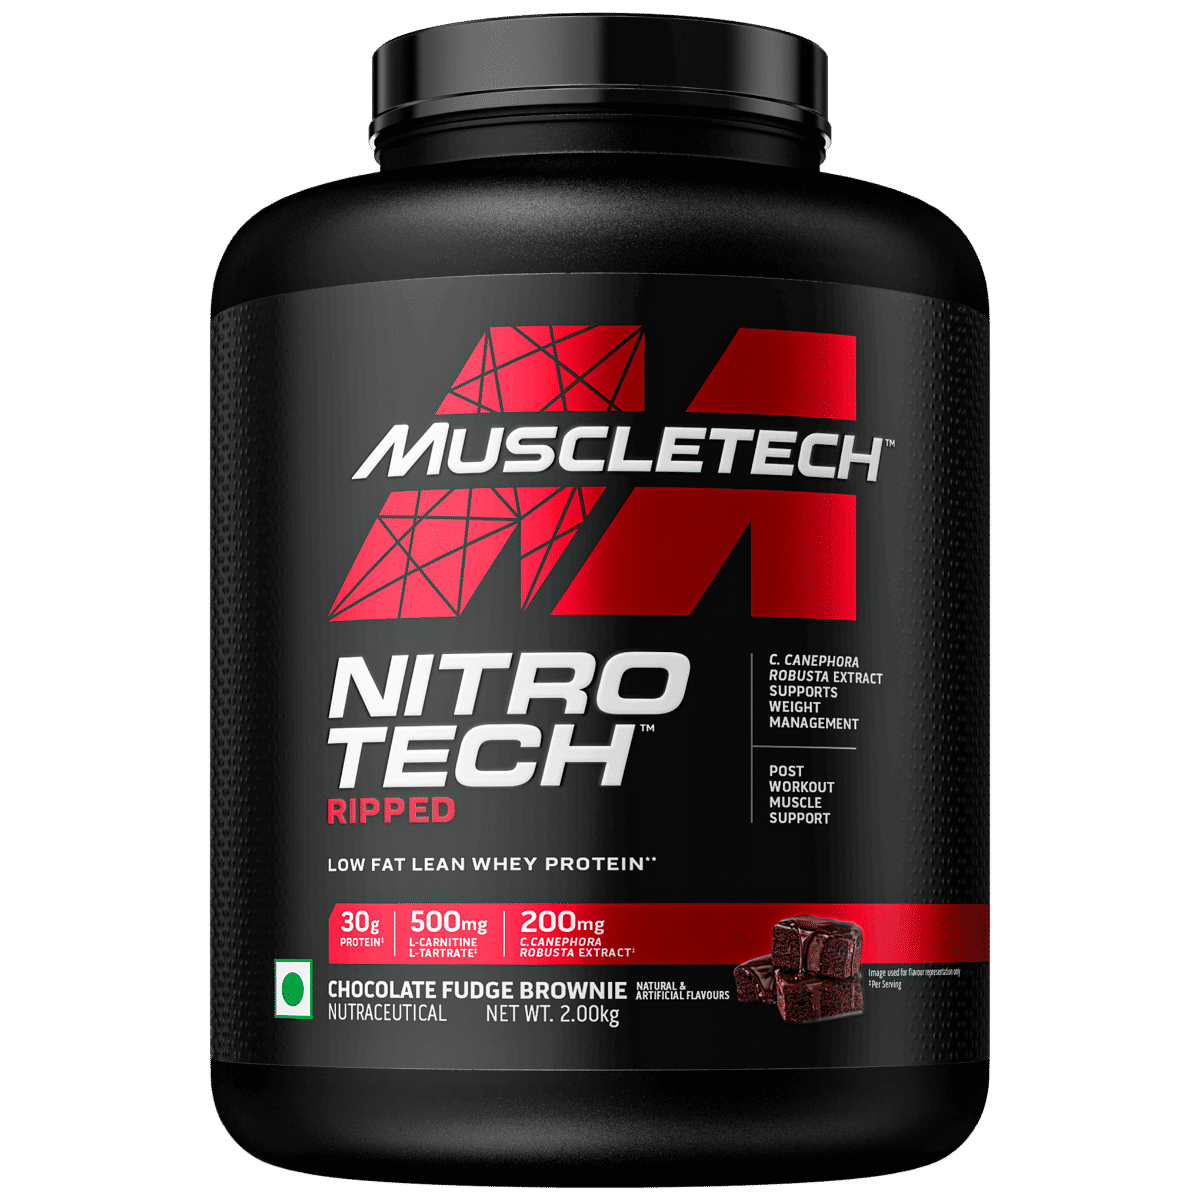 Buy Muscletech Nitrotech Ripped Low Fat Whey Protein Chocolate Fudge Brownie Flavour Powder, 2 kg Online